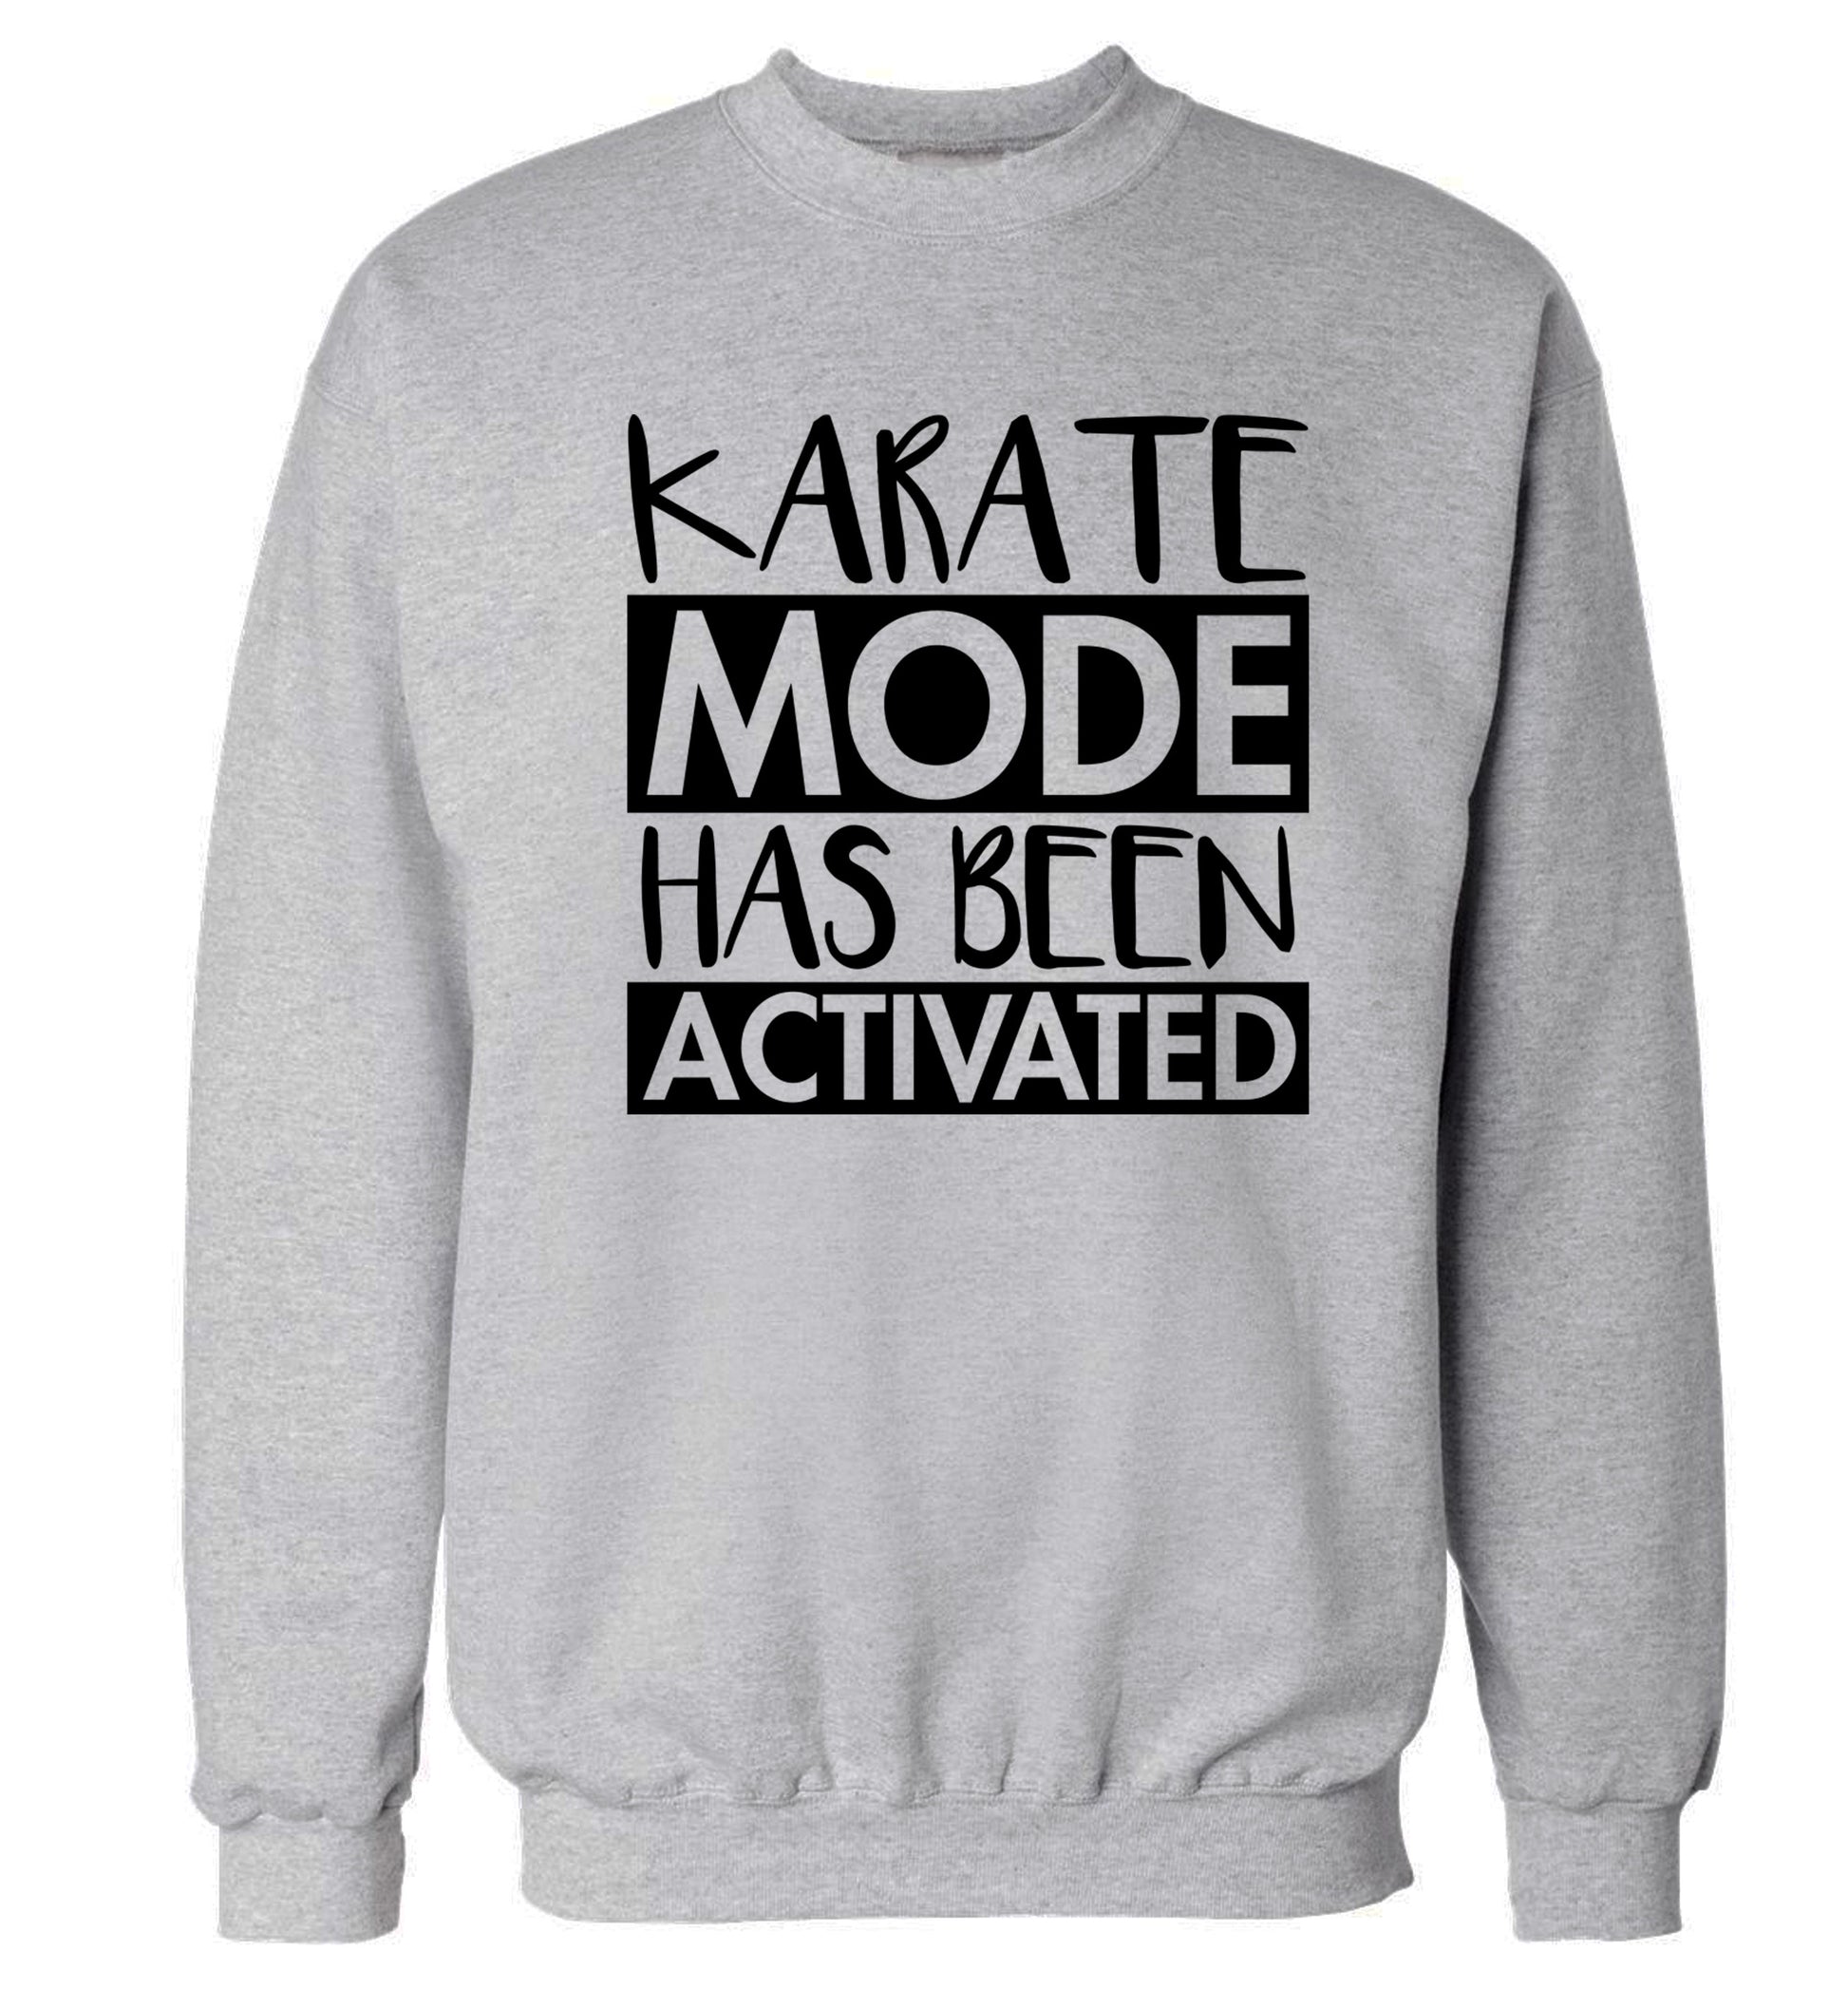 Karate mode activated Adult's unisex grey Sweater 2XL